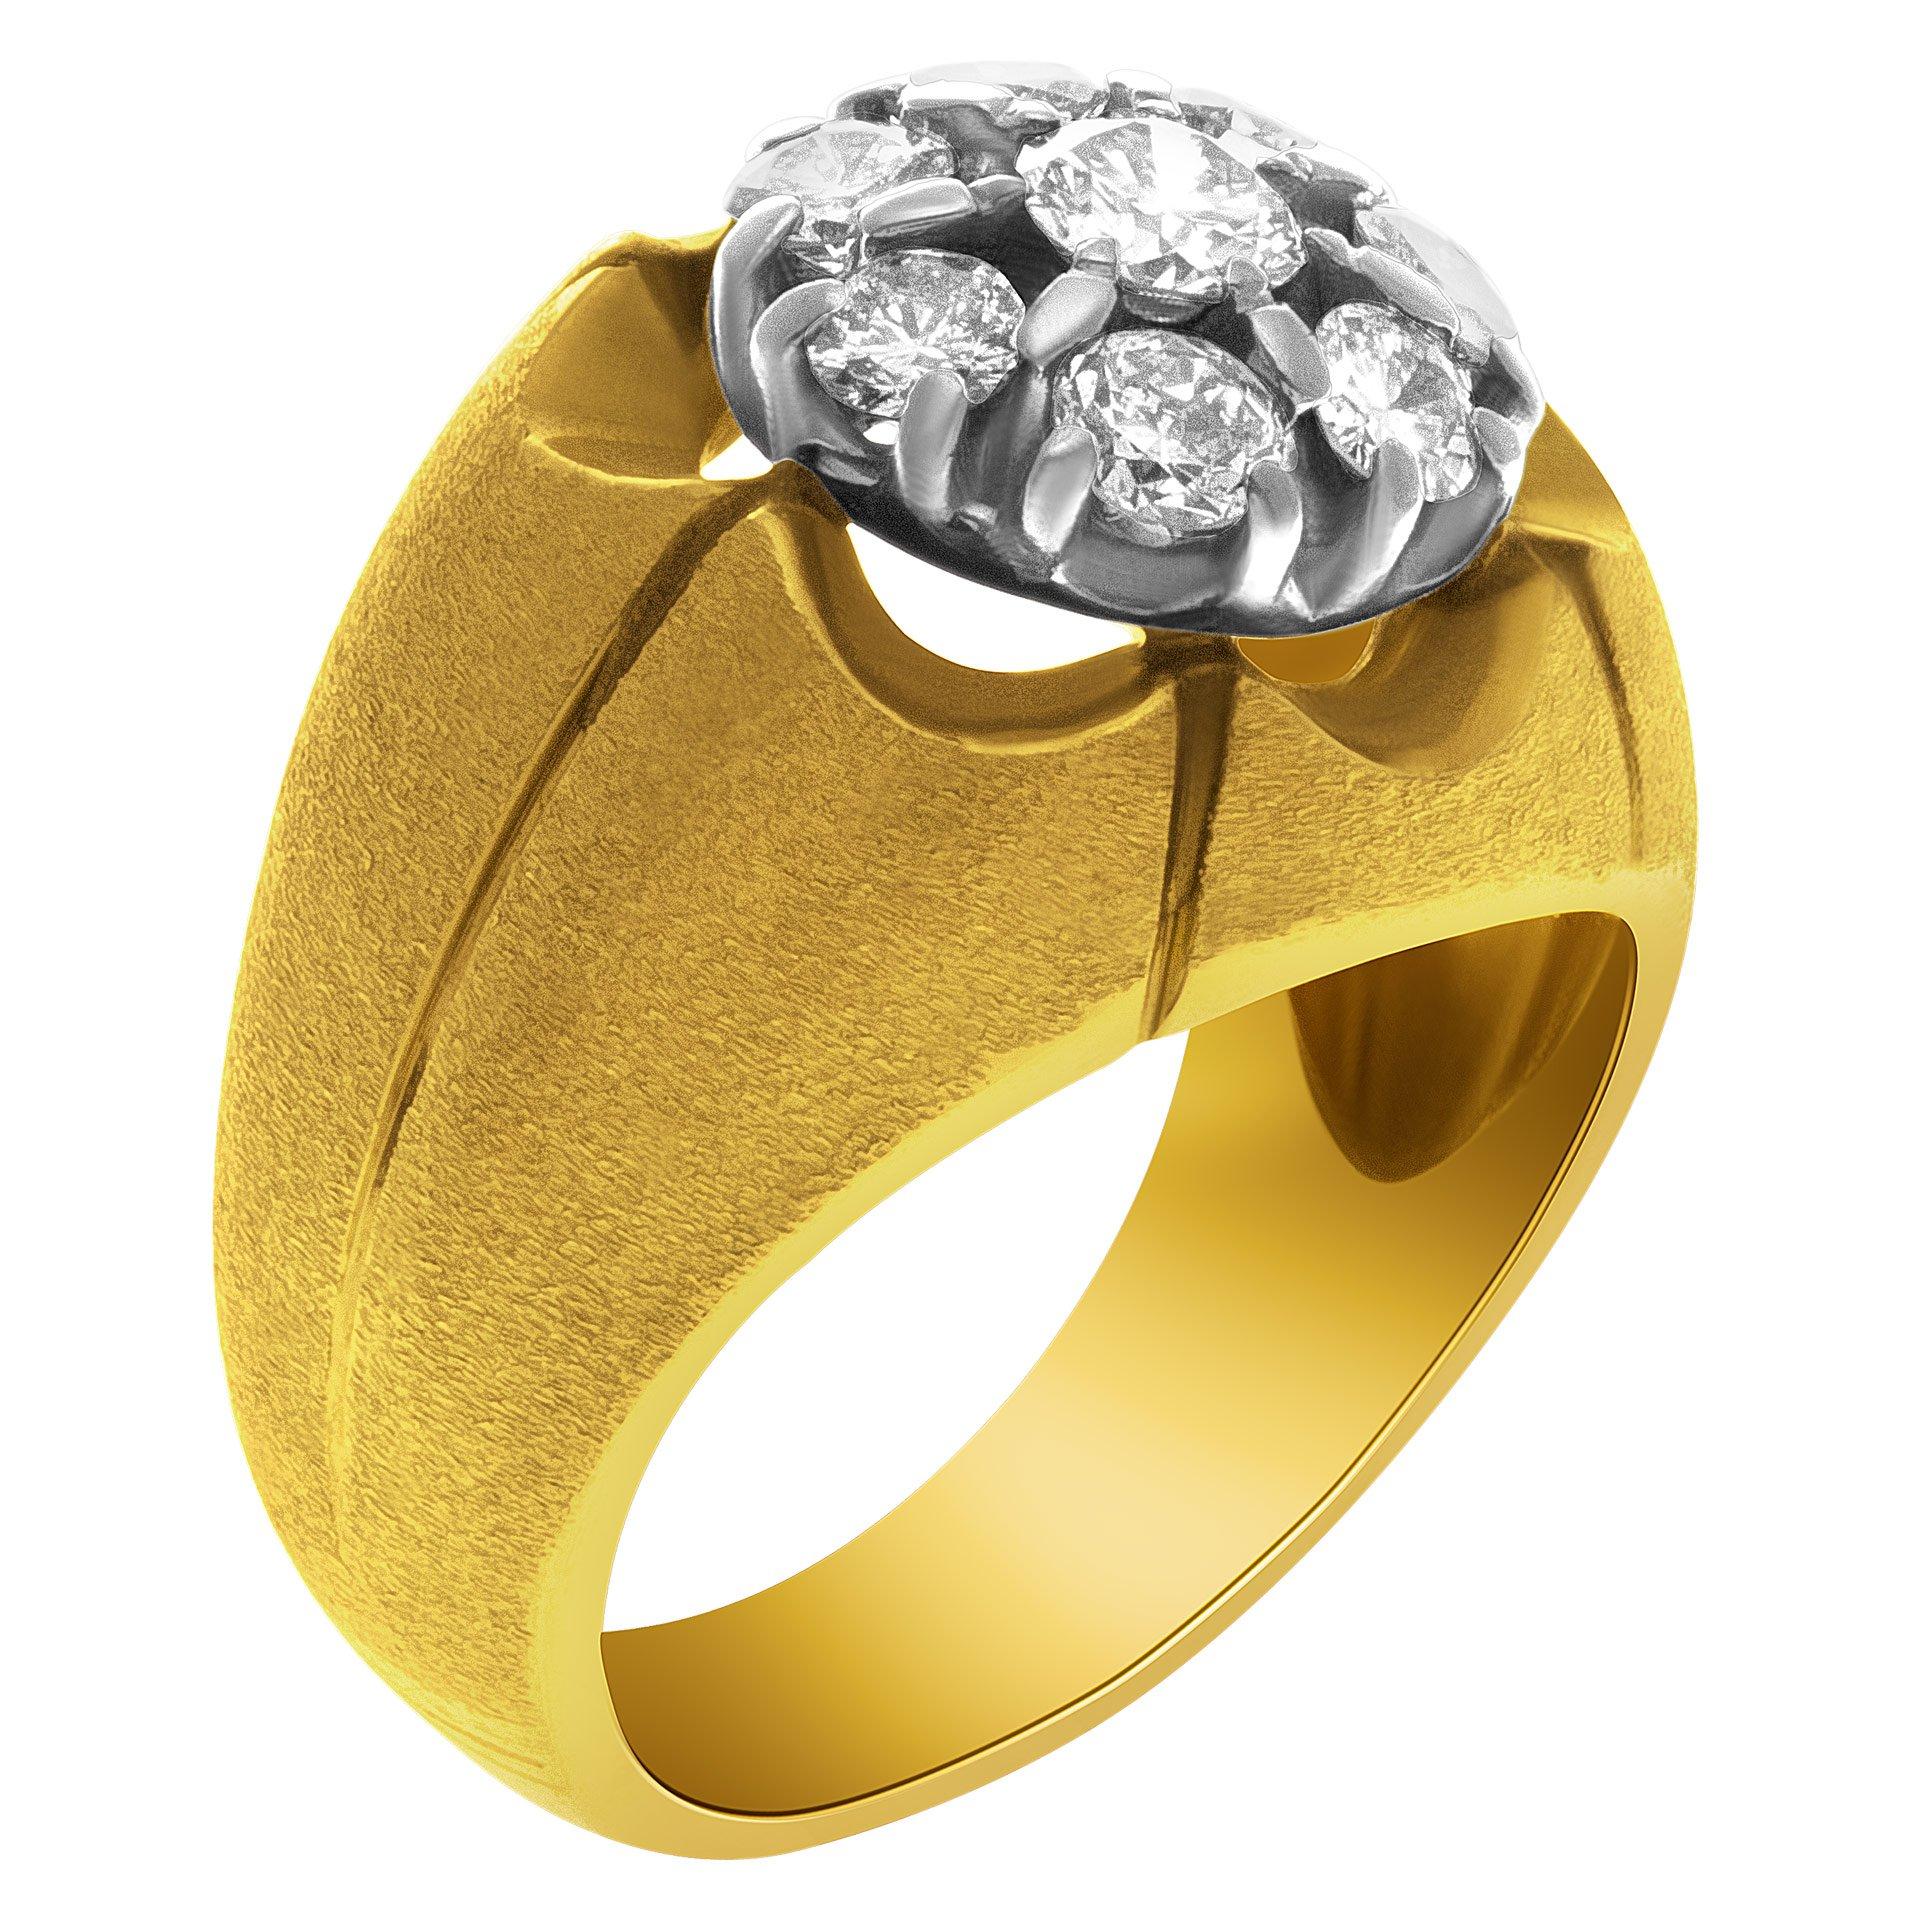 Attractive 14k yellow gold ring with center diamond cluster approx. 1 carat in diamonds. Size 8. Width of diamond cluster: 11.8mmx11.8mm, width at shank: 4.4mm.

This Diamond ring is currently size 8 and some items can be sized up or down, please